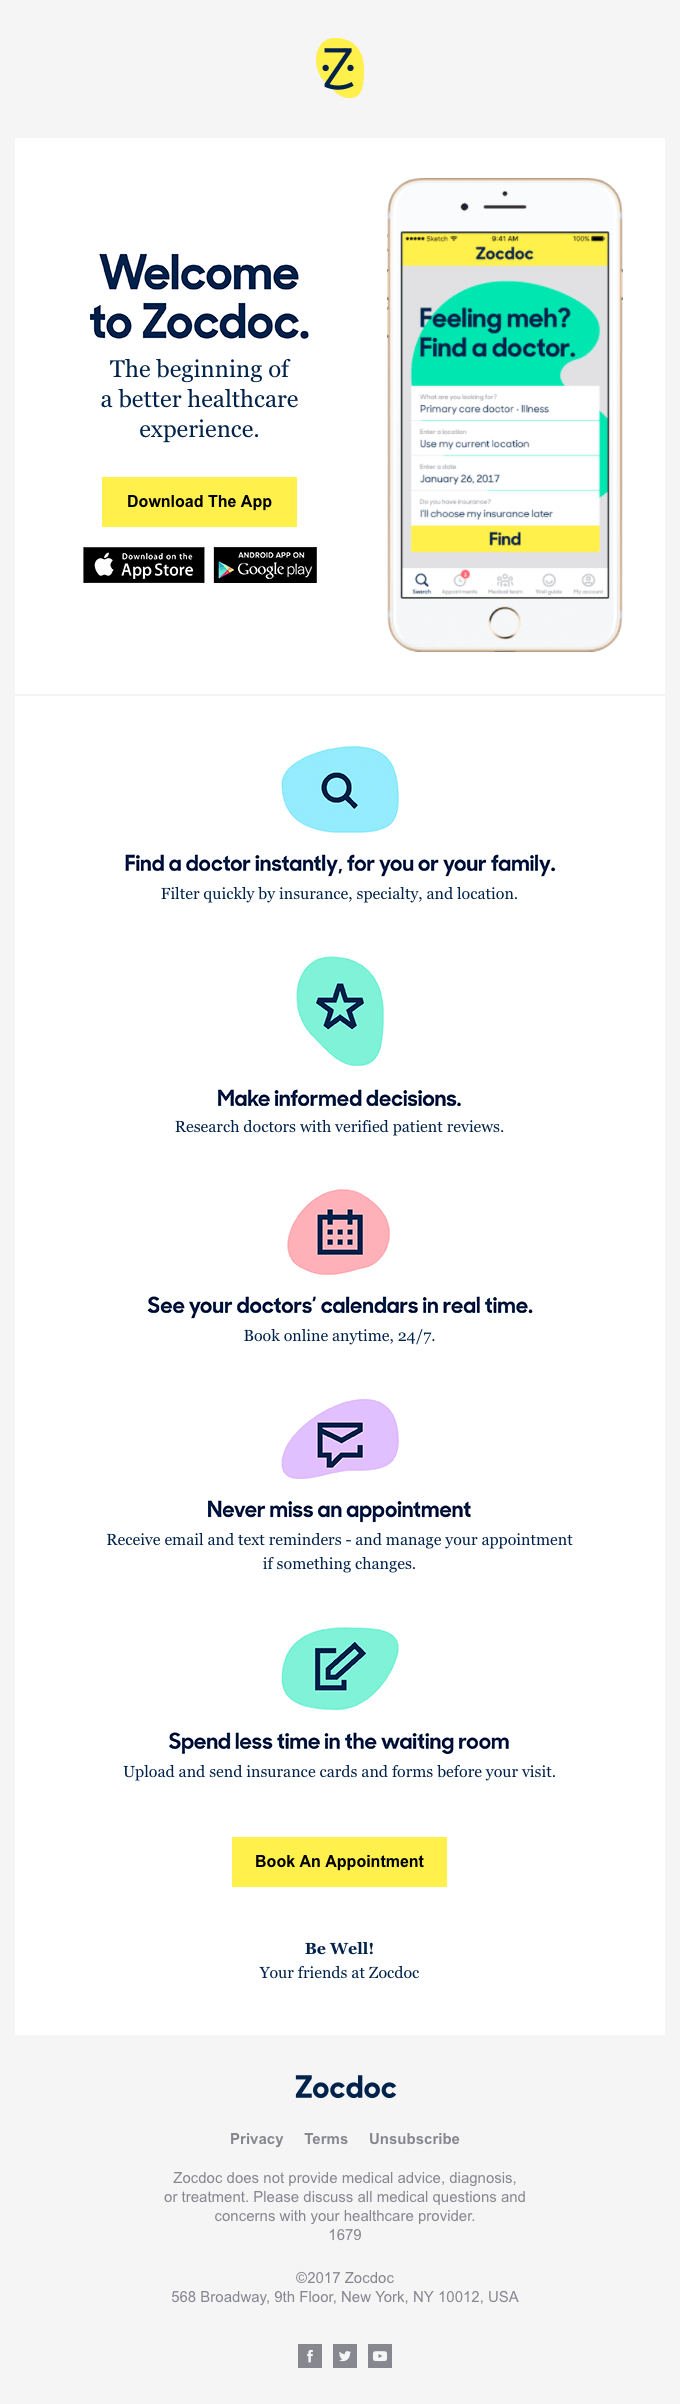 Welcome! Zocdoc will see you now. - Really Good Emails